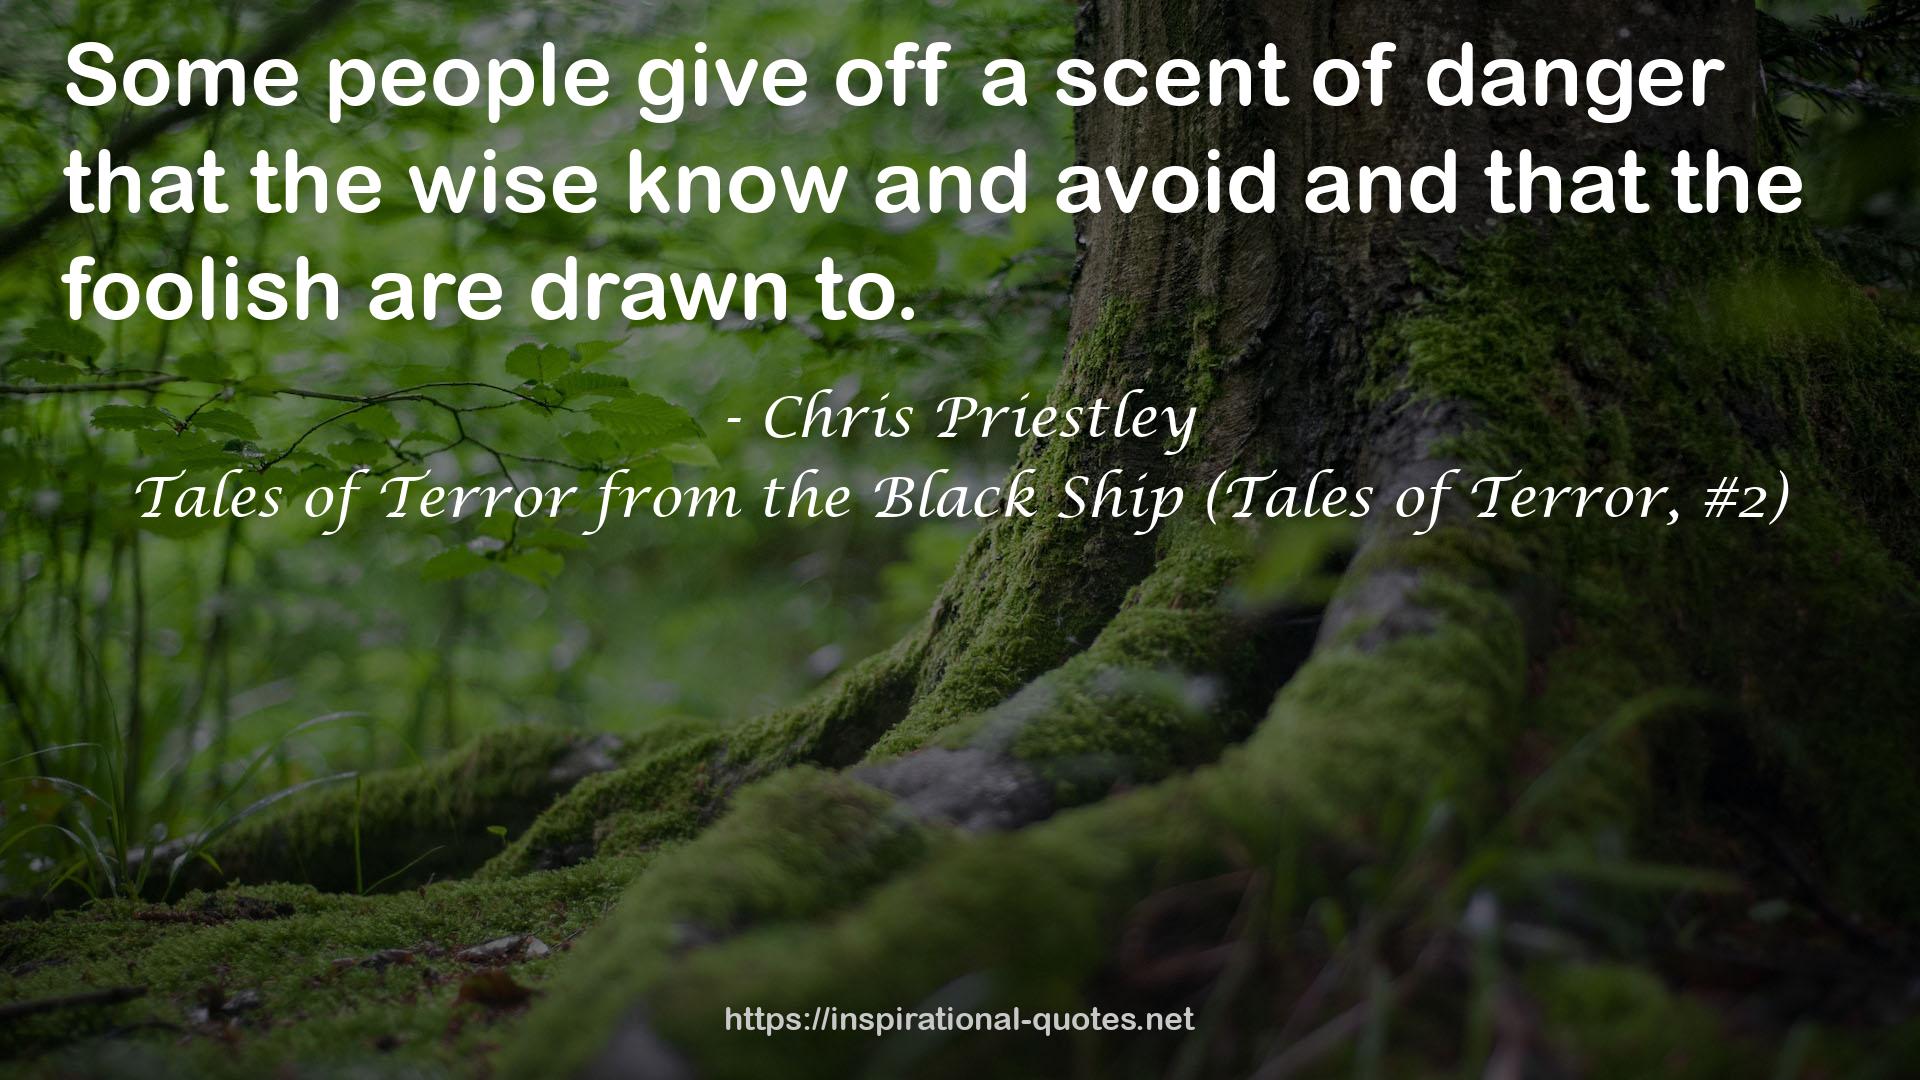 Tales of Terror from the Black Ship (Tales of Terror, #2) QUOTES